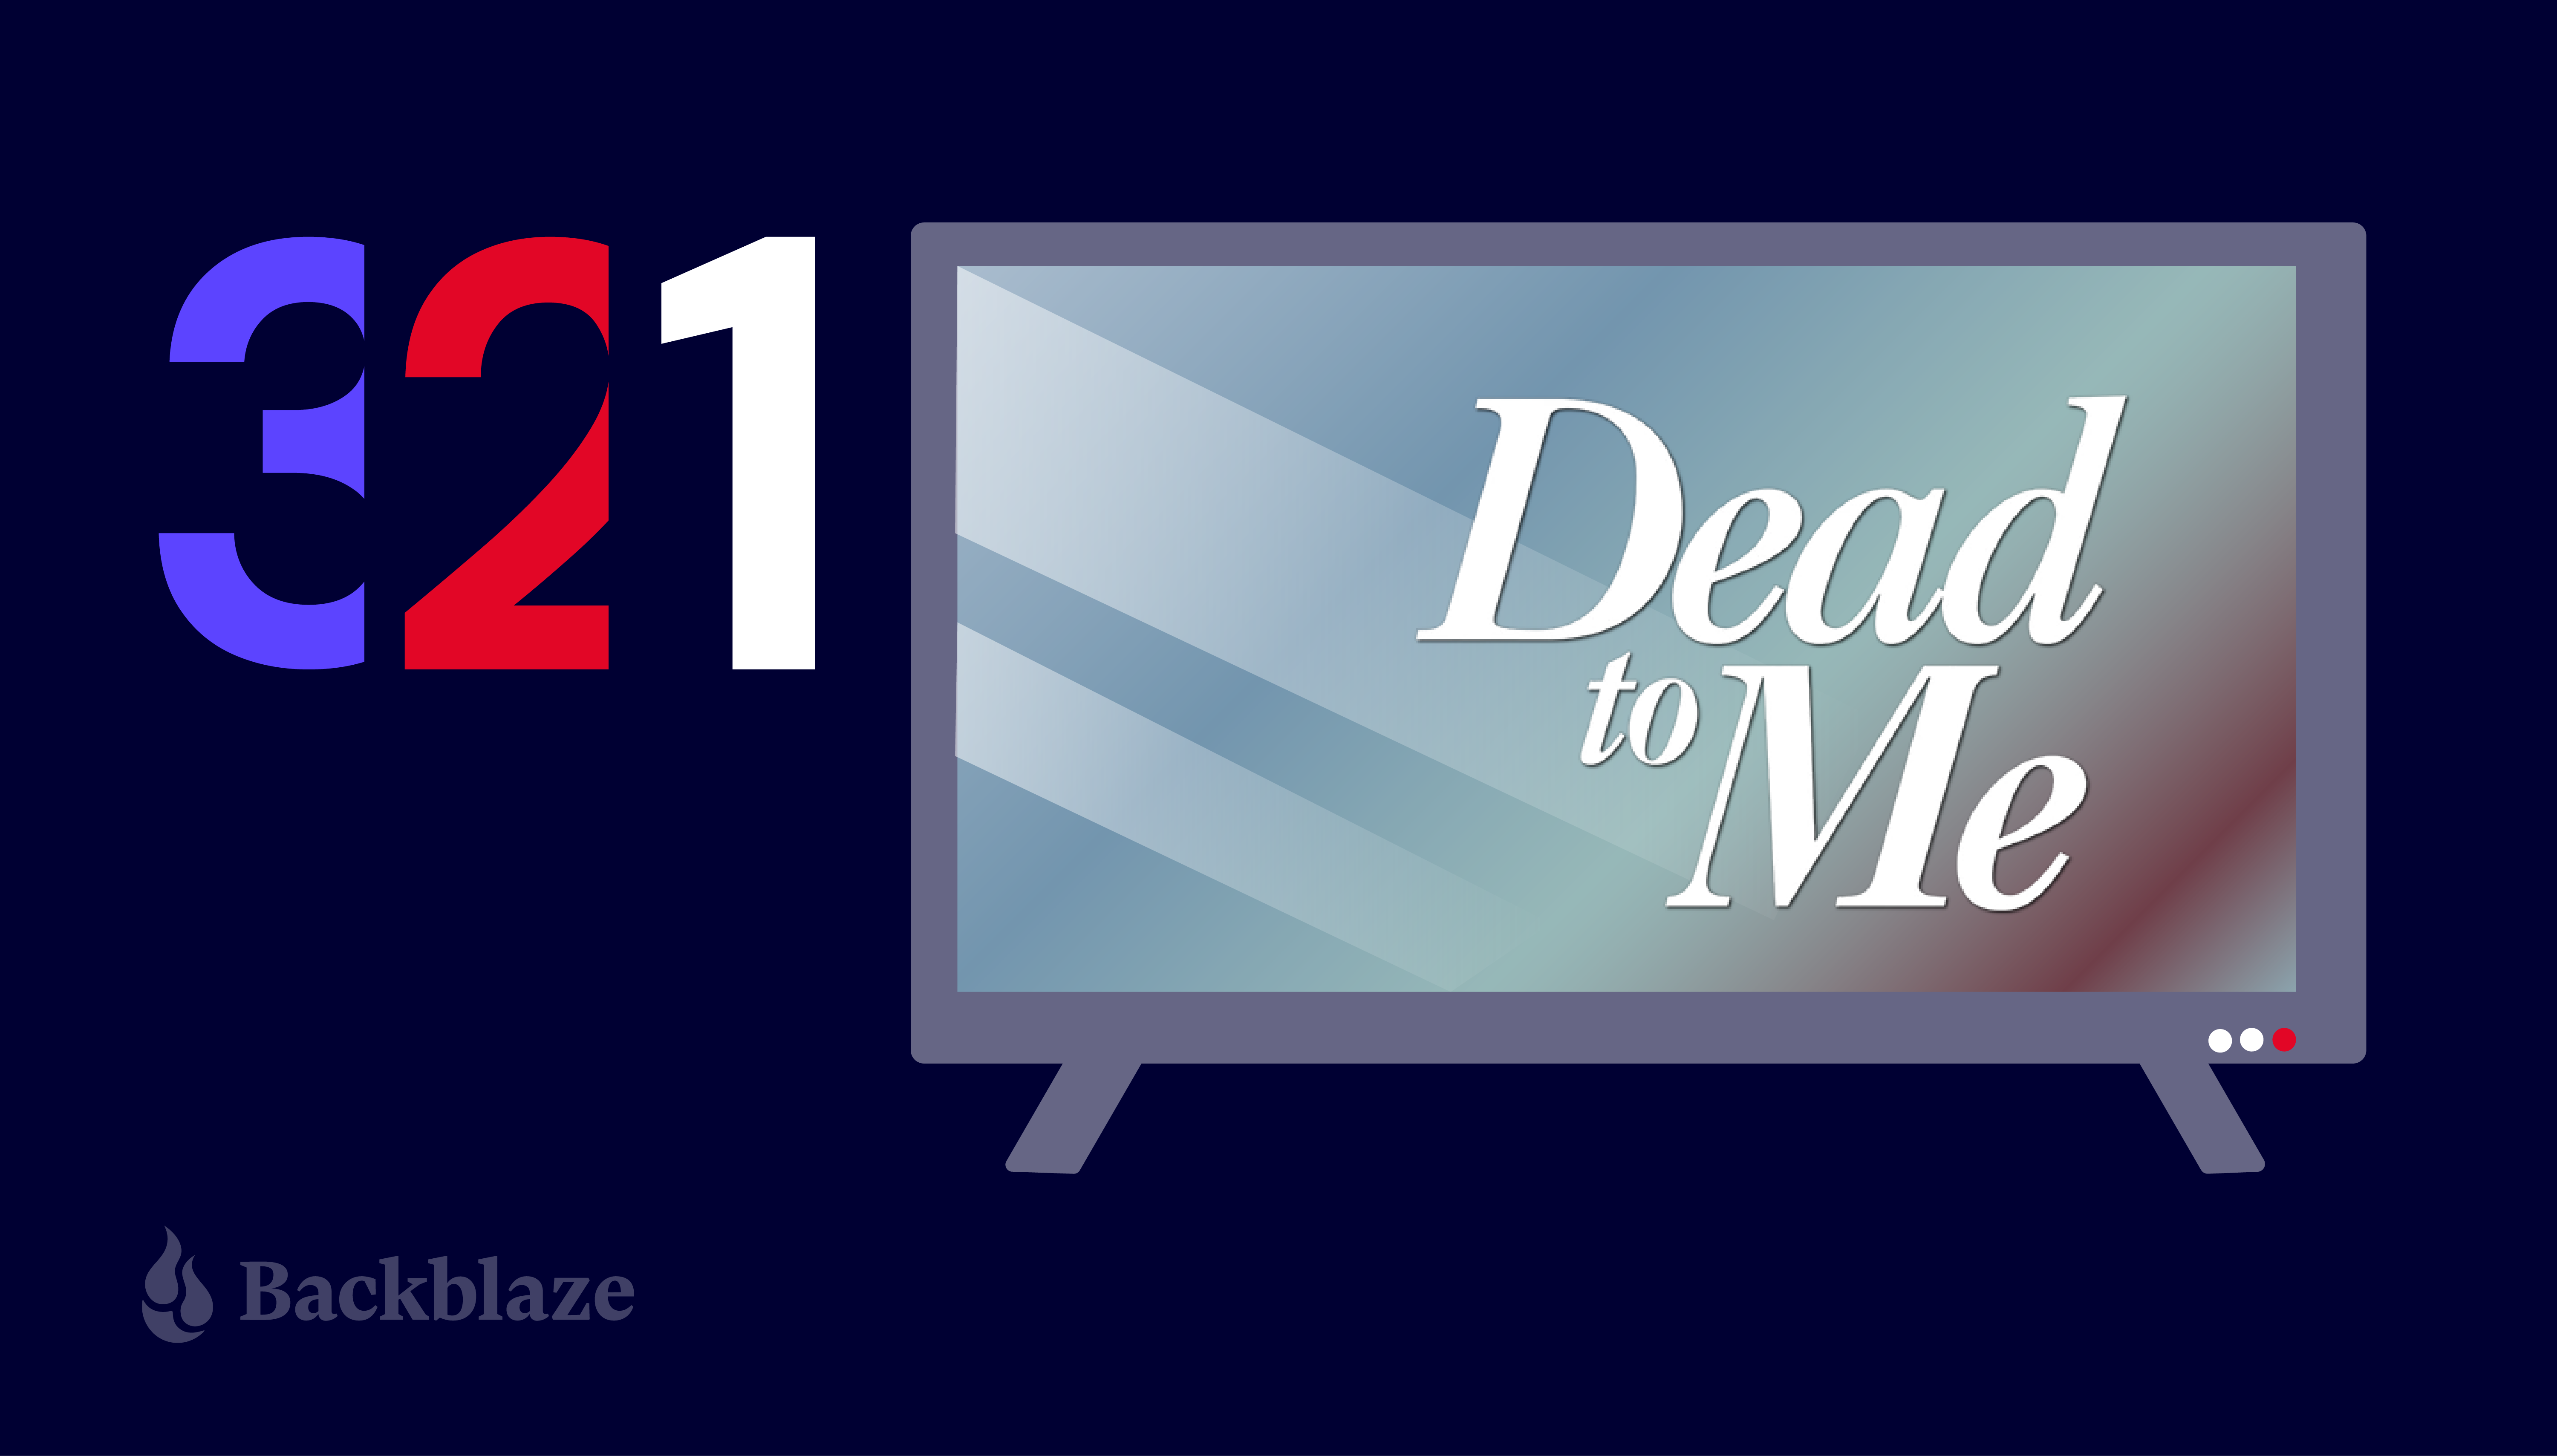 A decorative image showing a TV screen with a spotlight coming from the right. The numerals 3, 2, 1 are displayed on the background of the image; the words Dead to Me are displayed on the TV screen. 